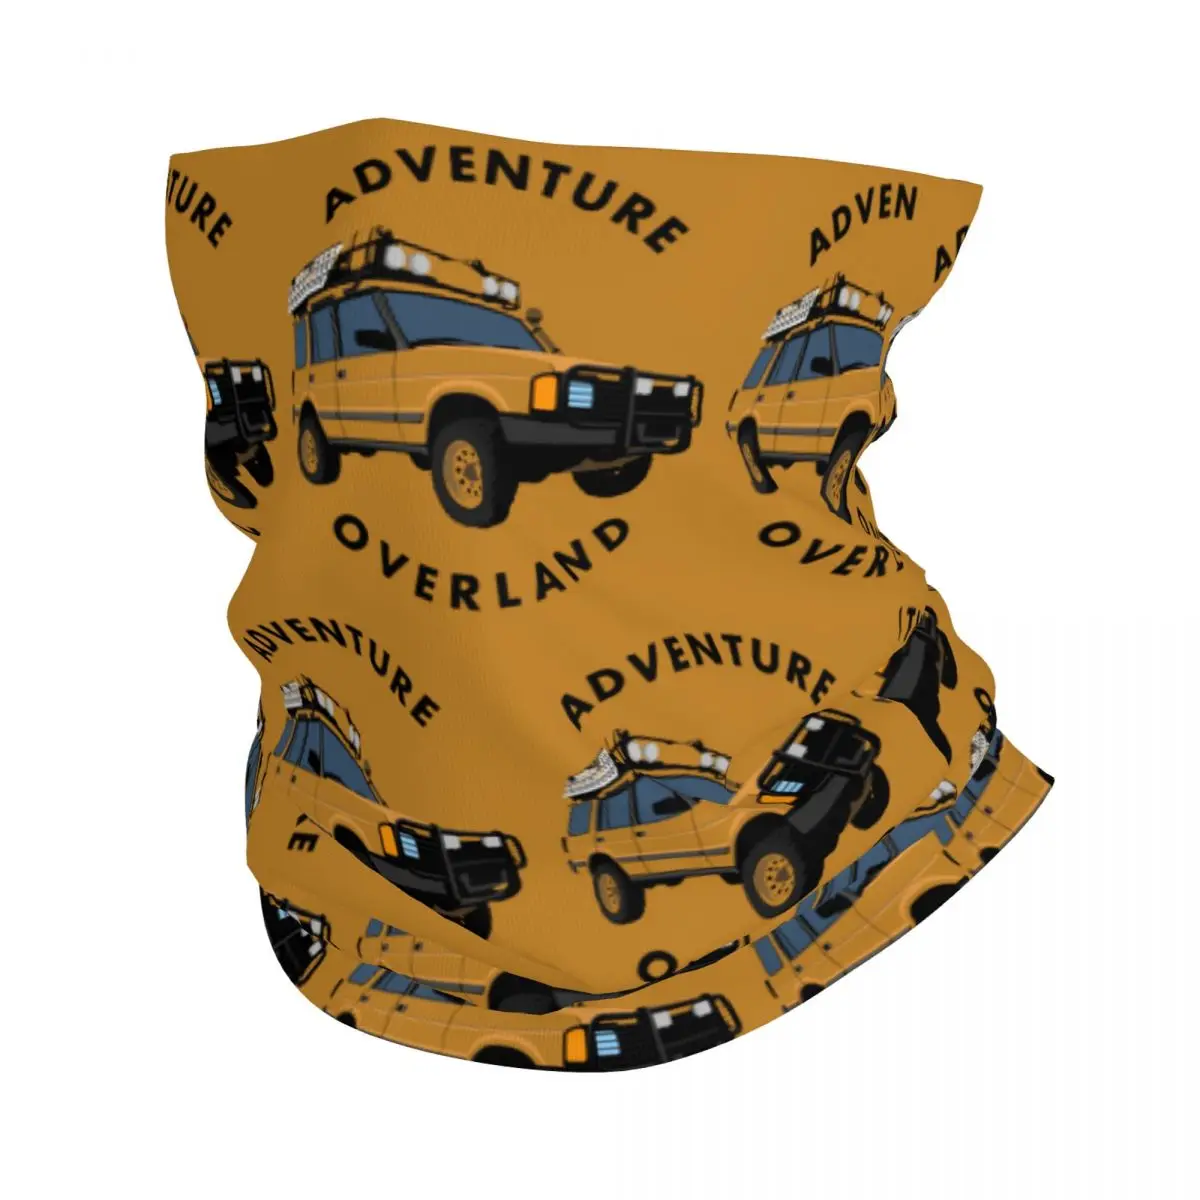 

Camel Trophy Adventure Overland Discovery Bandana Neck Gaiter Mask Scarf Multi-use Cycling Scarf Outdoor Sports for Men Adult